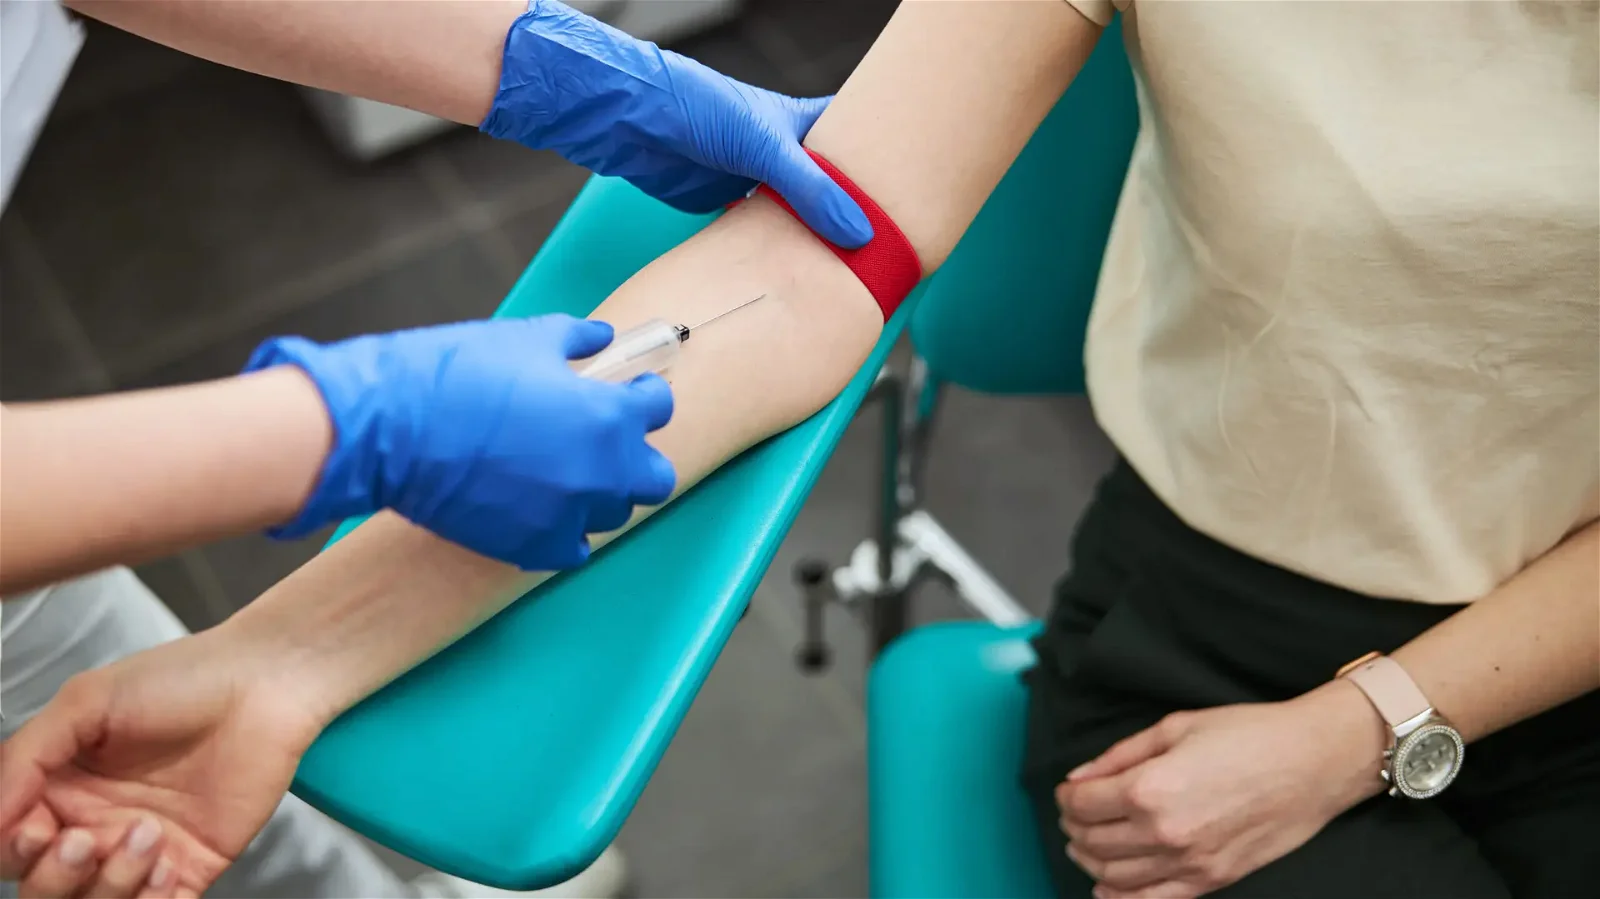 Inserting needle into arm vein. IV Sedation in dental chair.